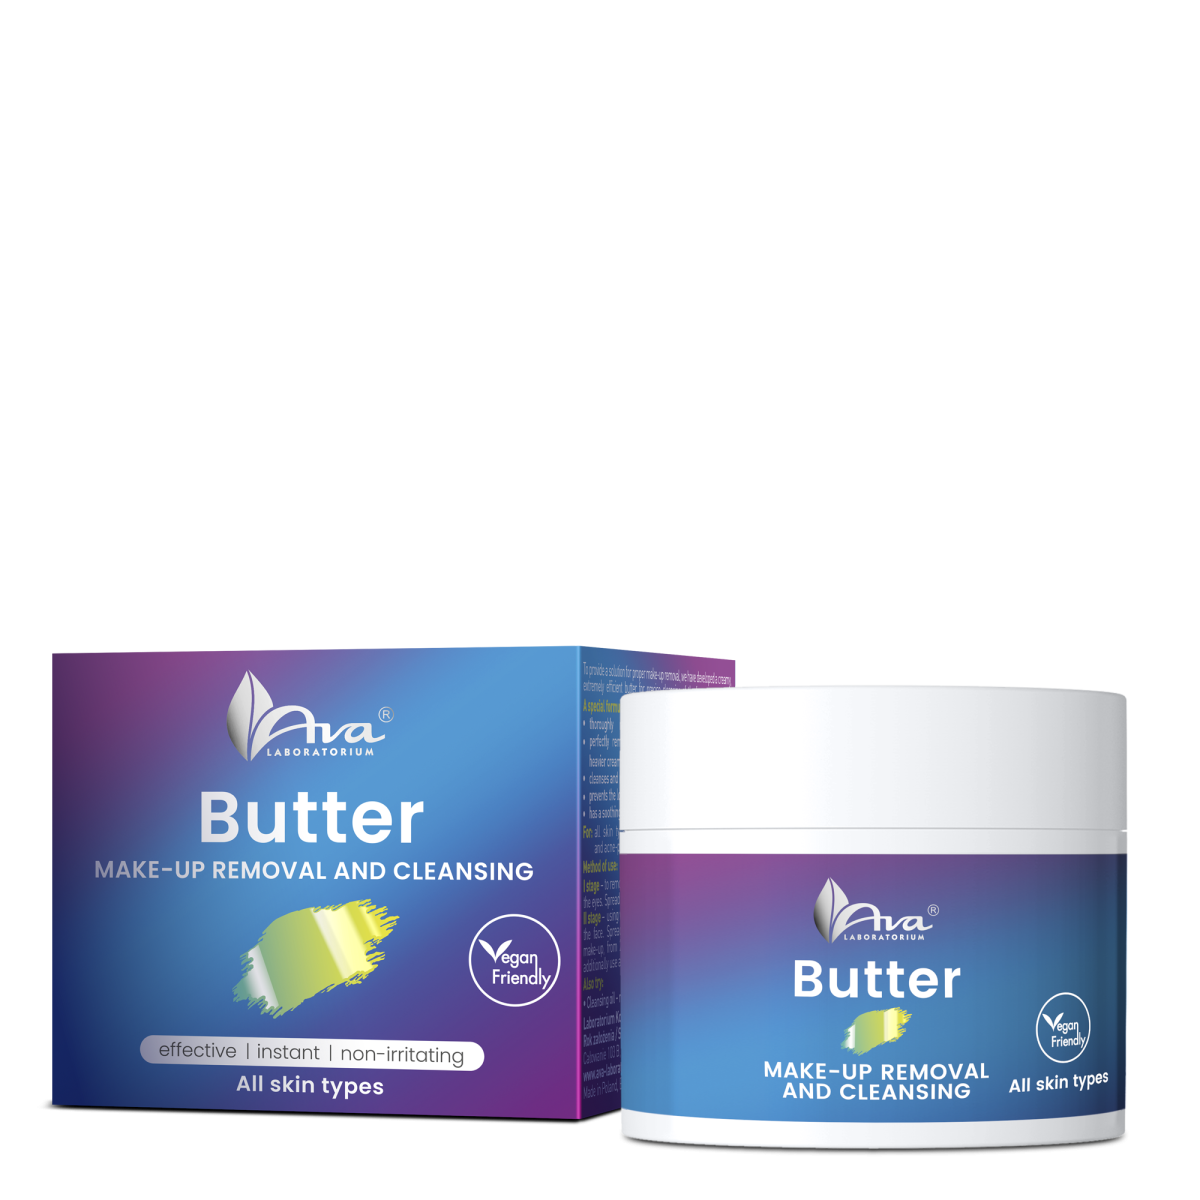 Butter make-up removal and cleansing